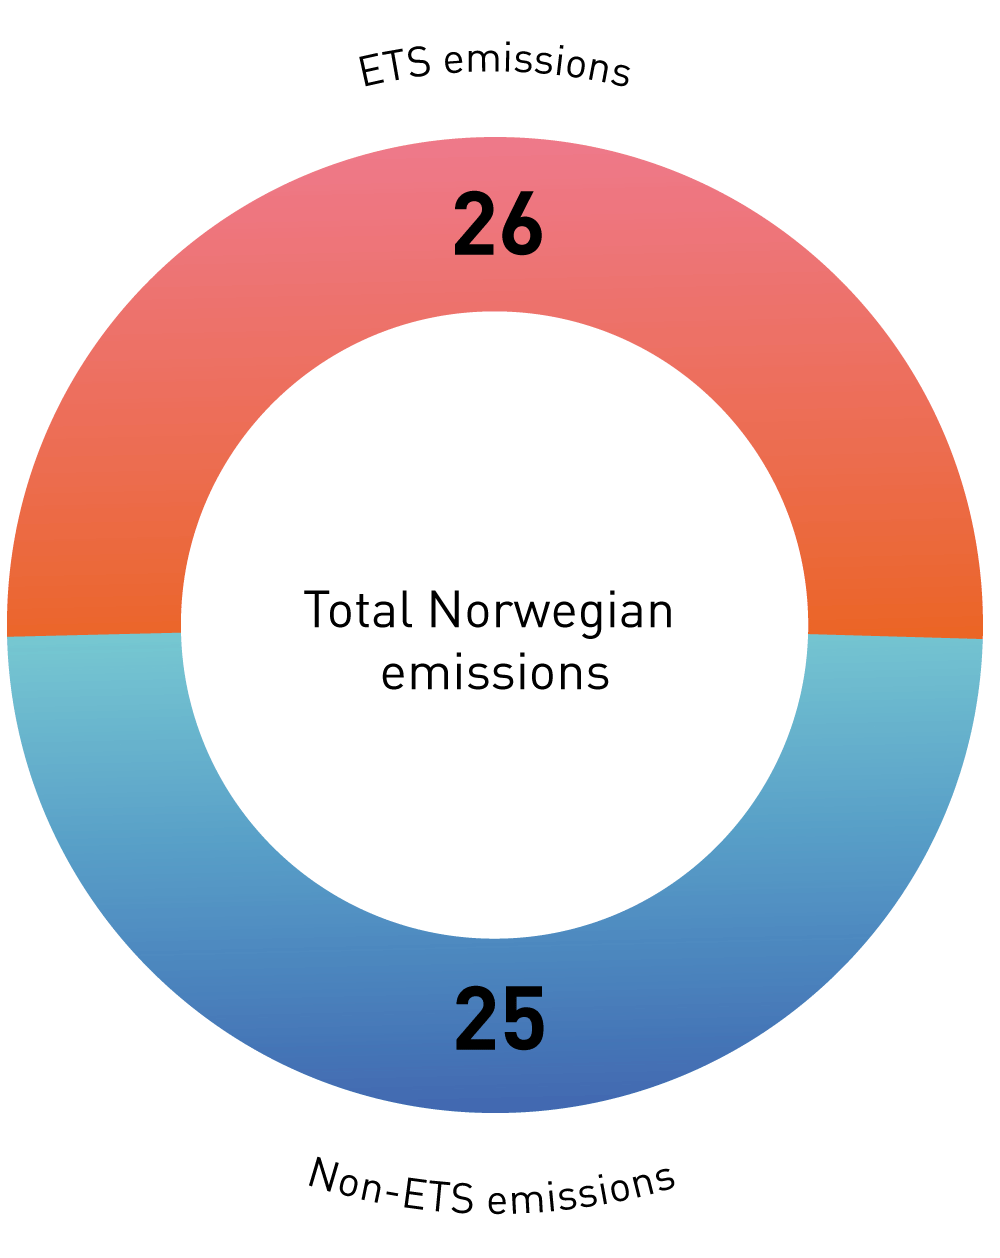 Figure 2.3 The split between ETS and non-ETS emissions in Norway (in million tonnes CO2eq)